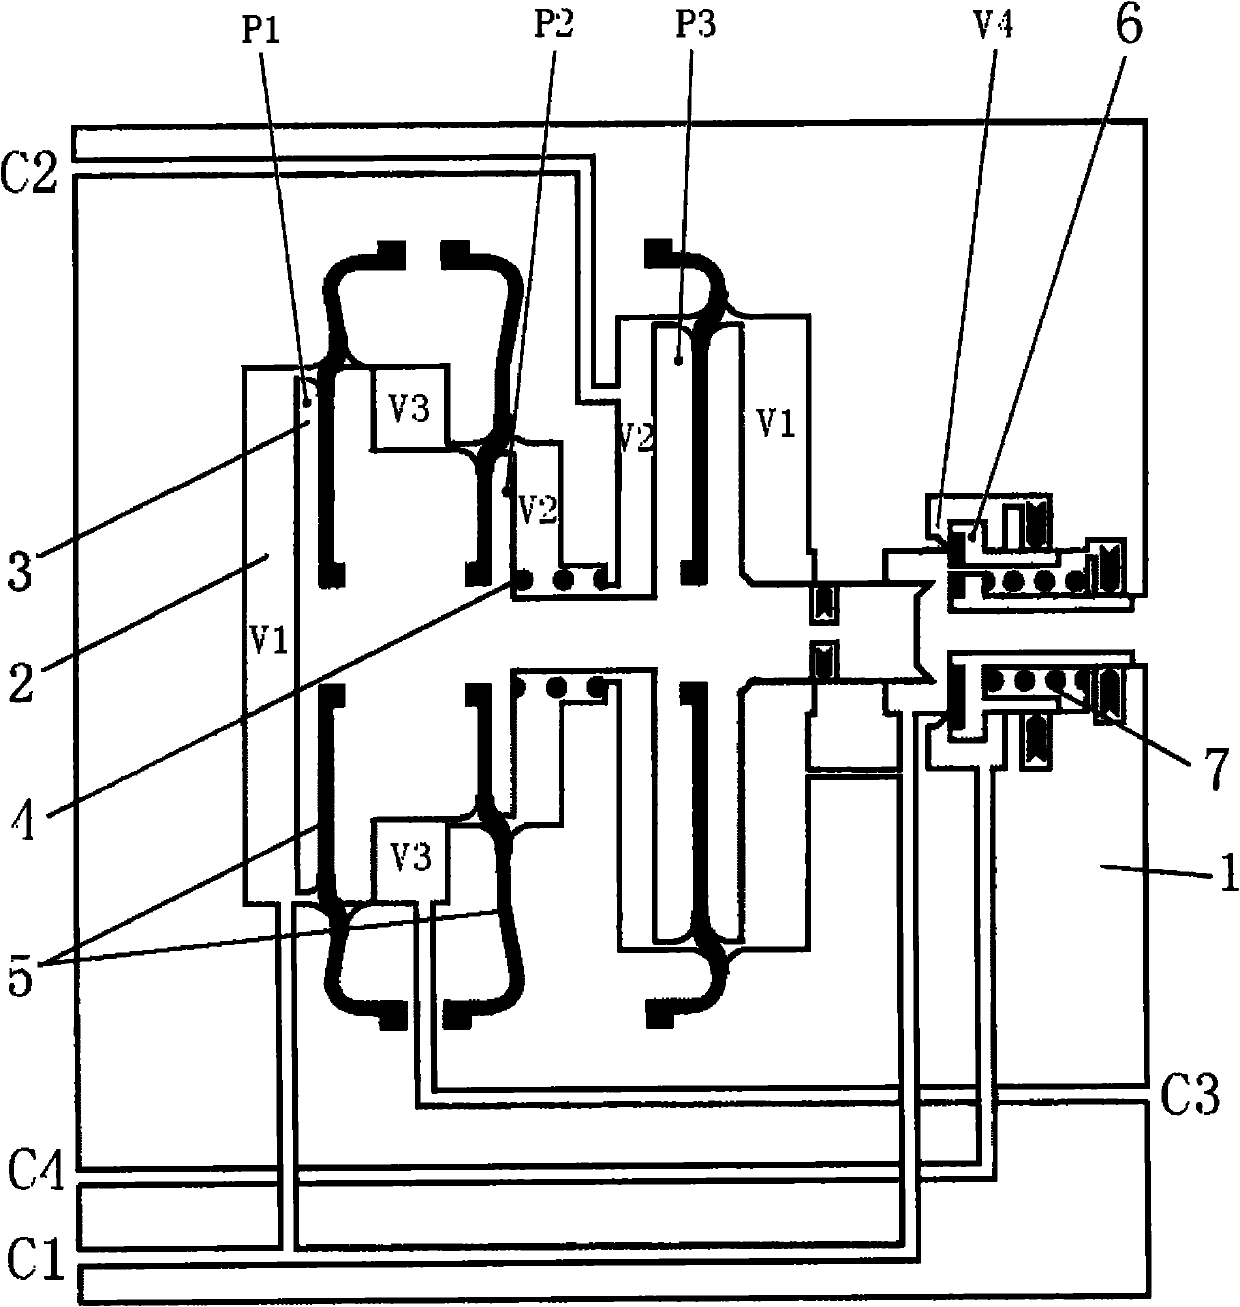 Relay valve for brake system of high-speed train